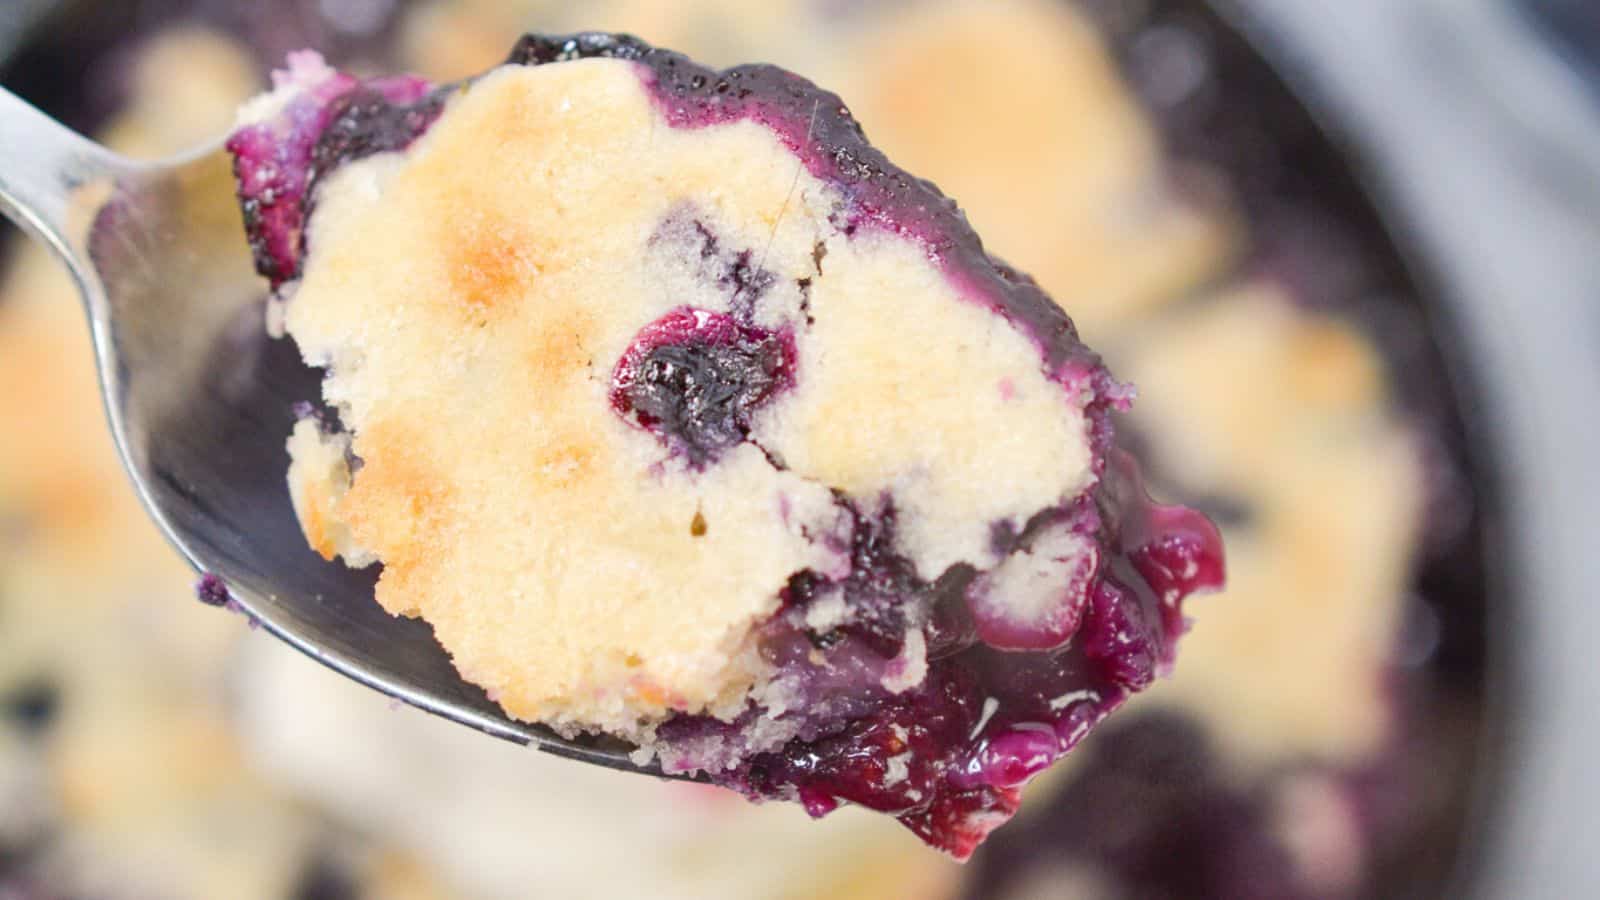 A spoon with blueberry cobbler with rest of cobbler in background.